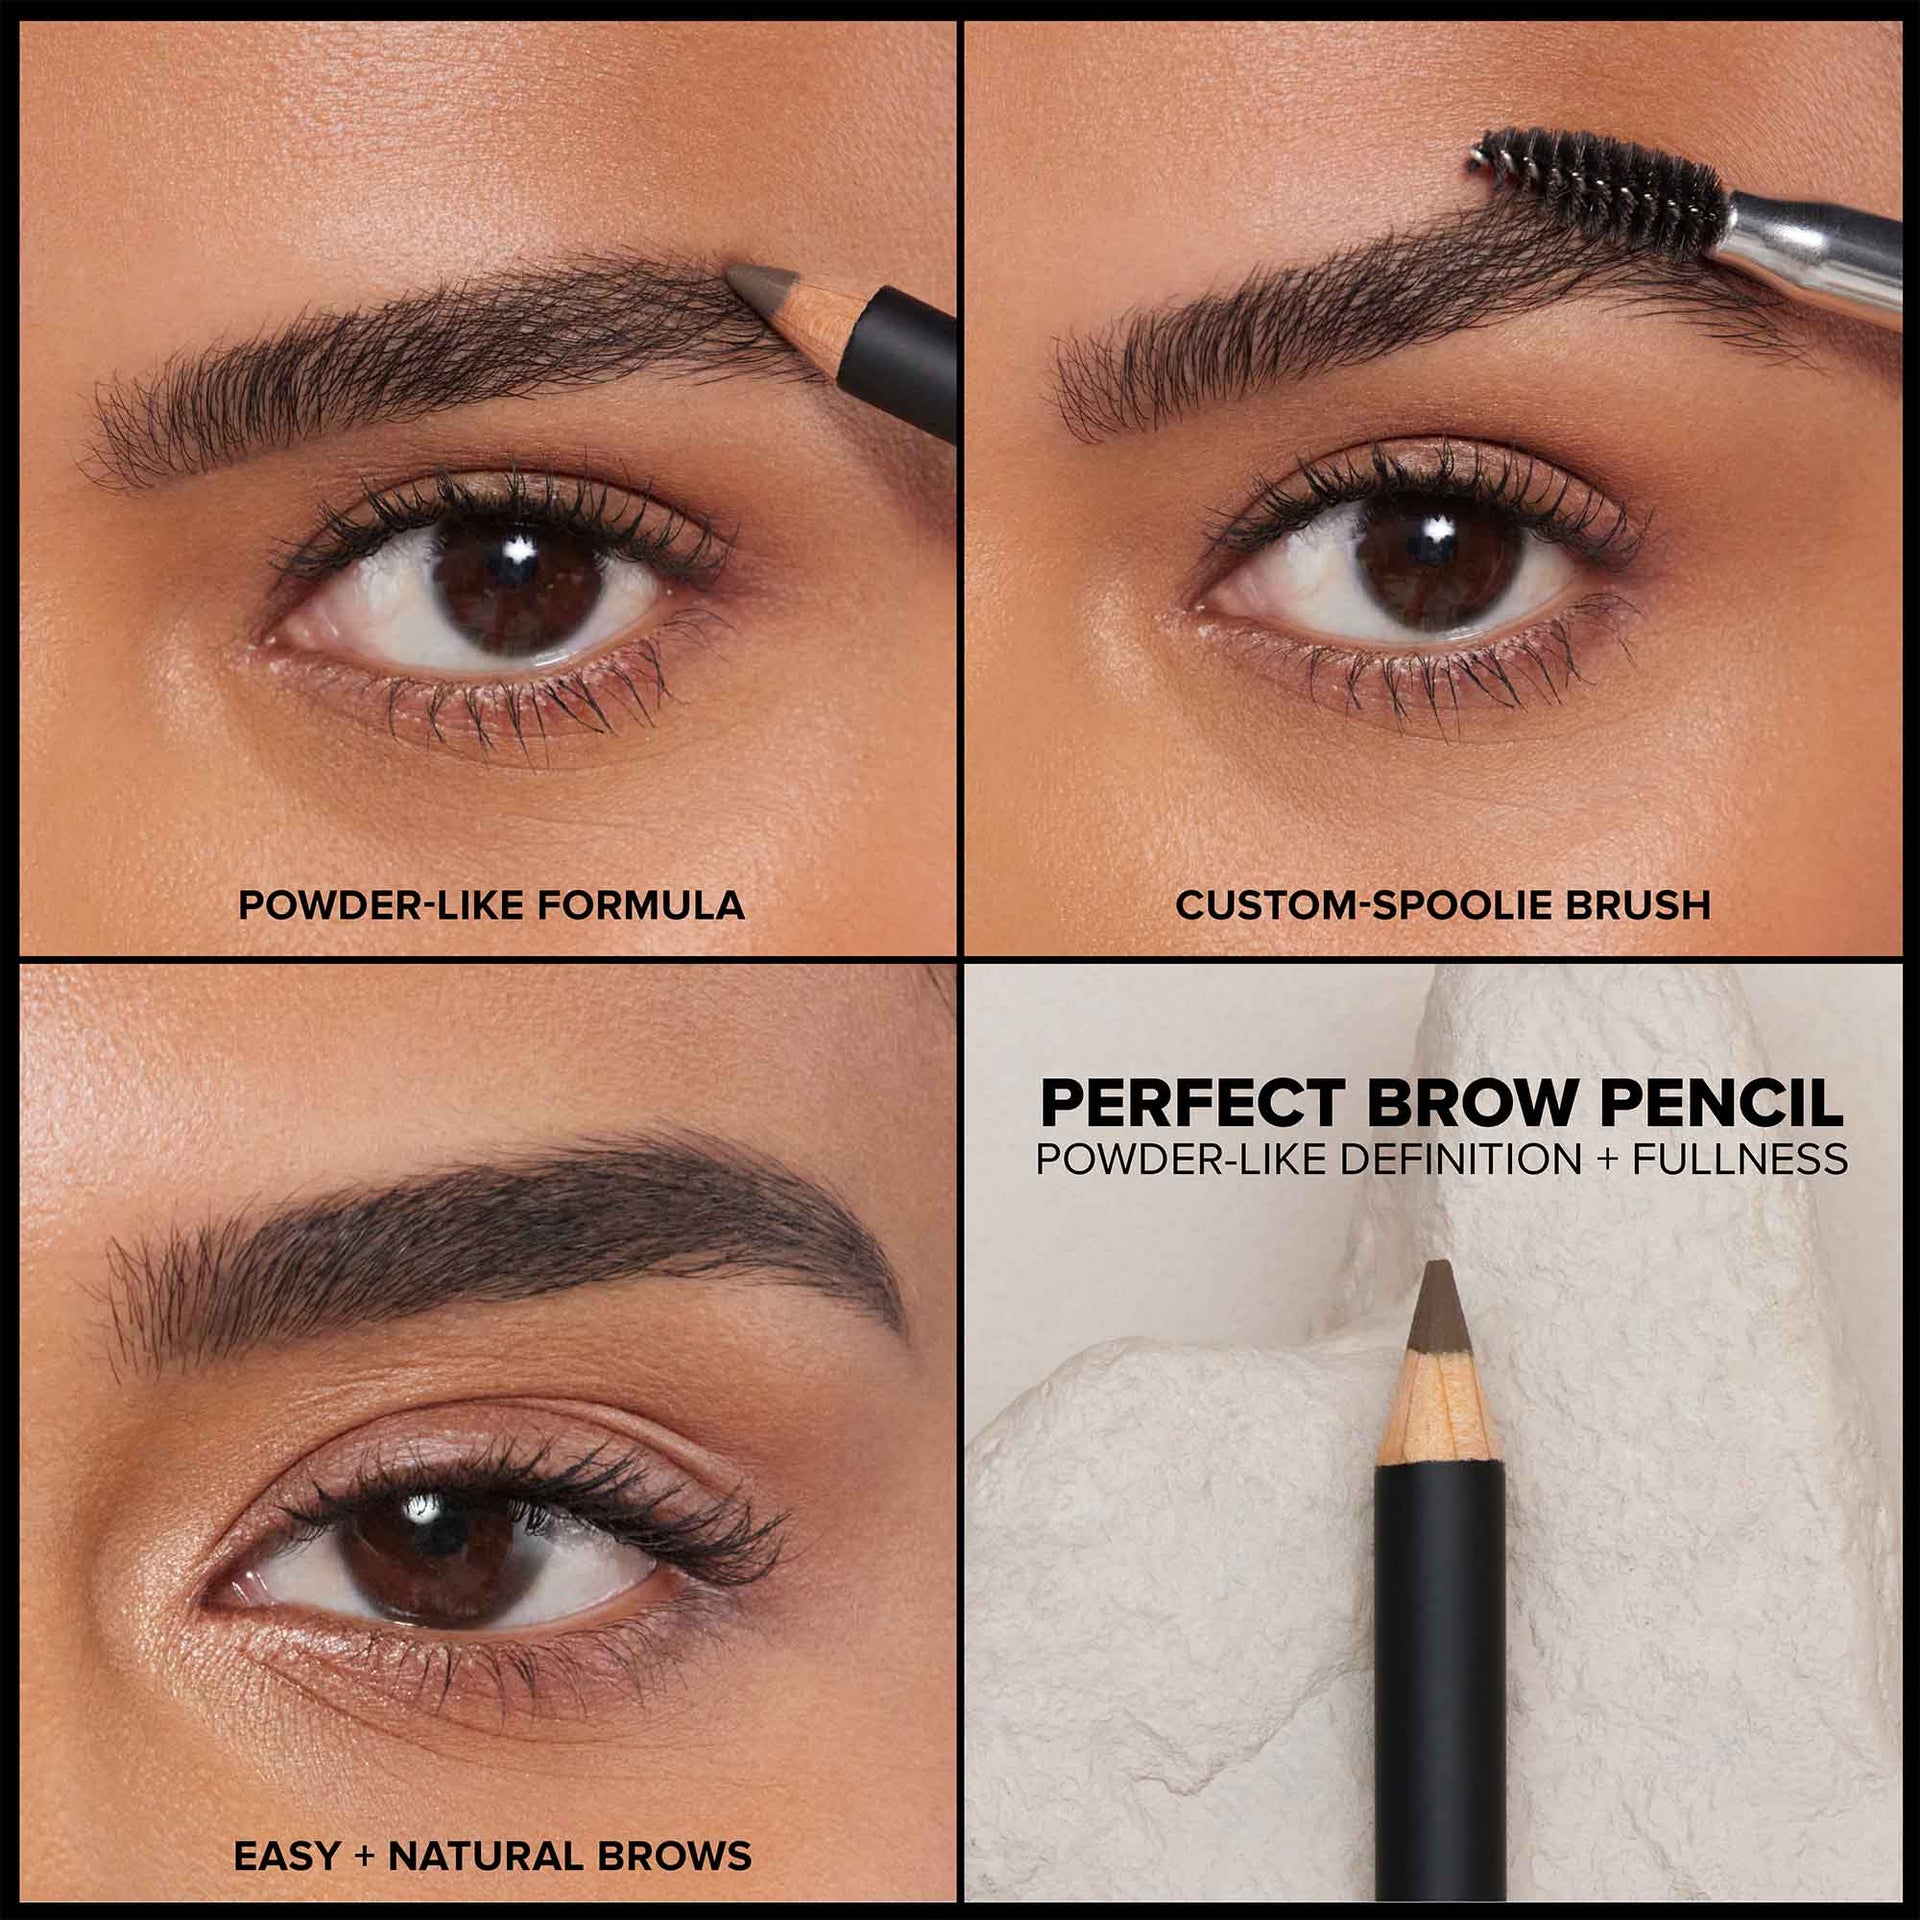 Perfect Brow Pencil Features